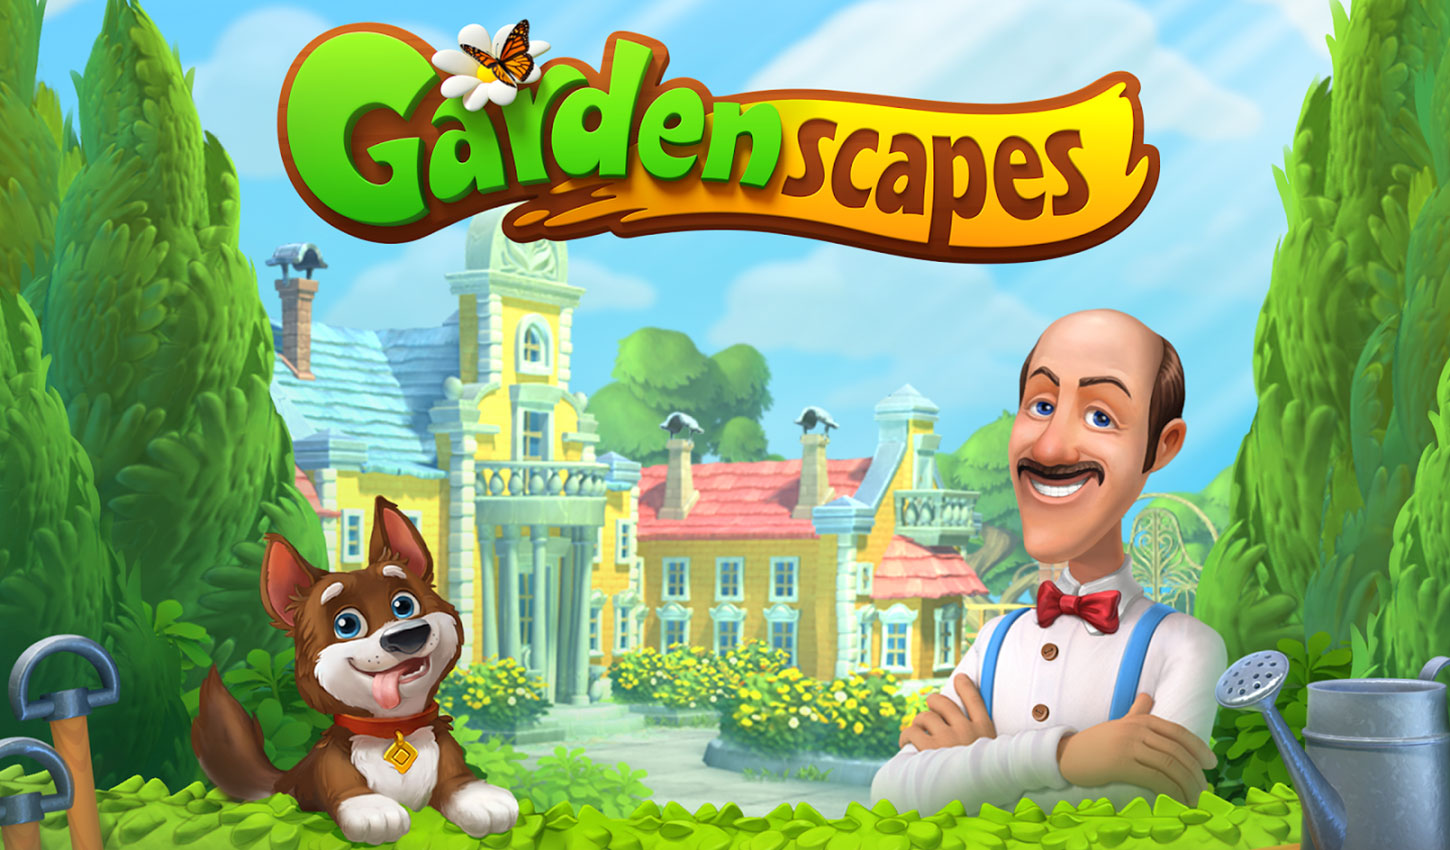 Gardenscapes Grows Past $3 Billion In Lifetime Player Spending